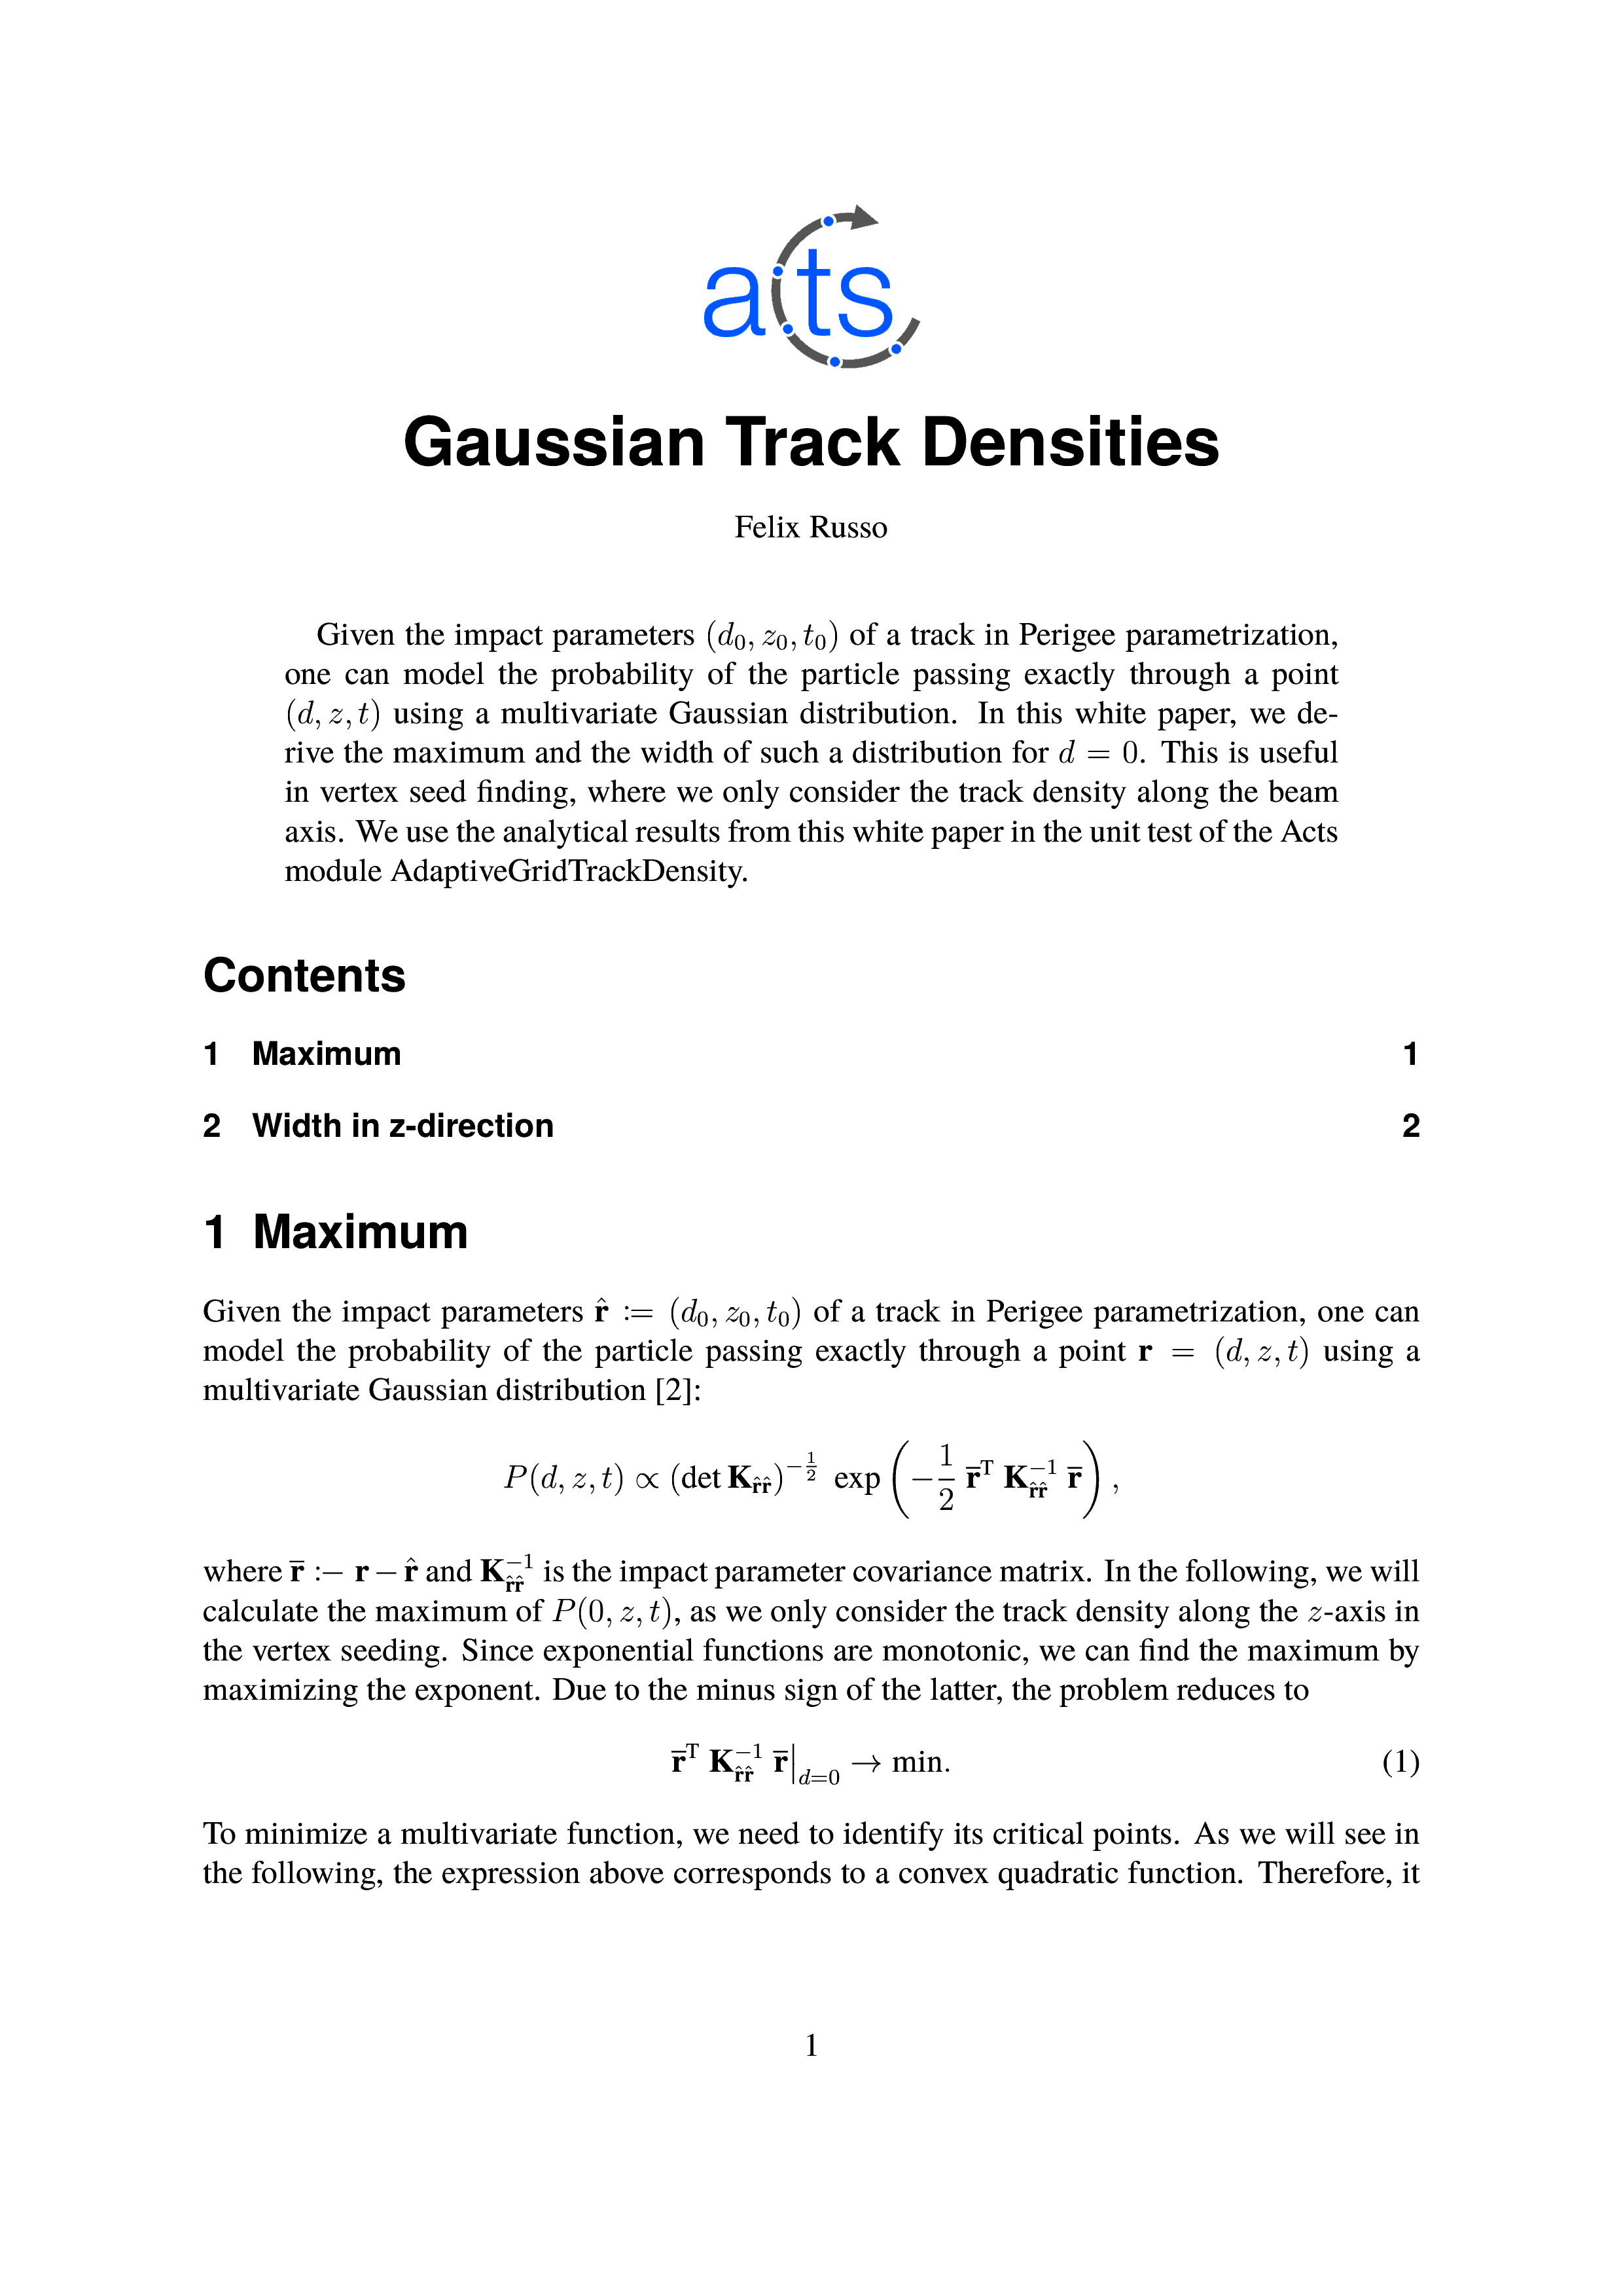 ../_images/gaussian-track-densities.png